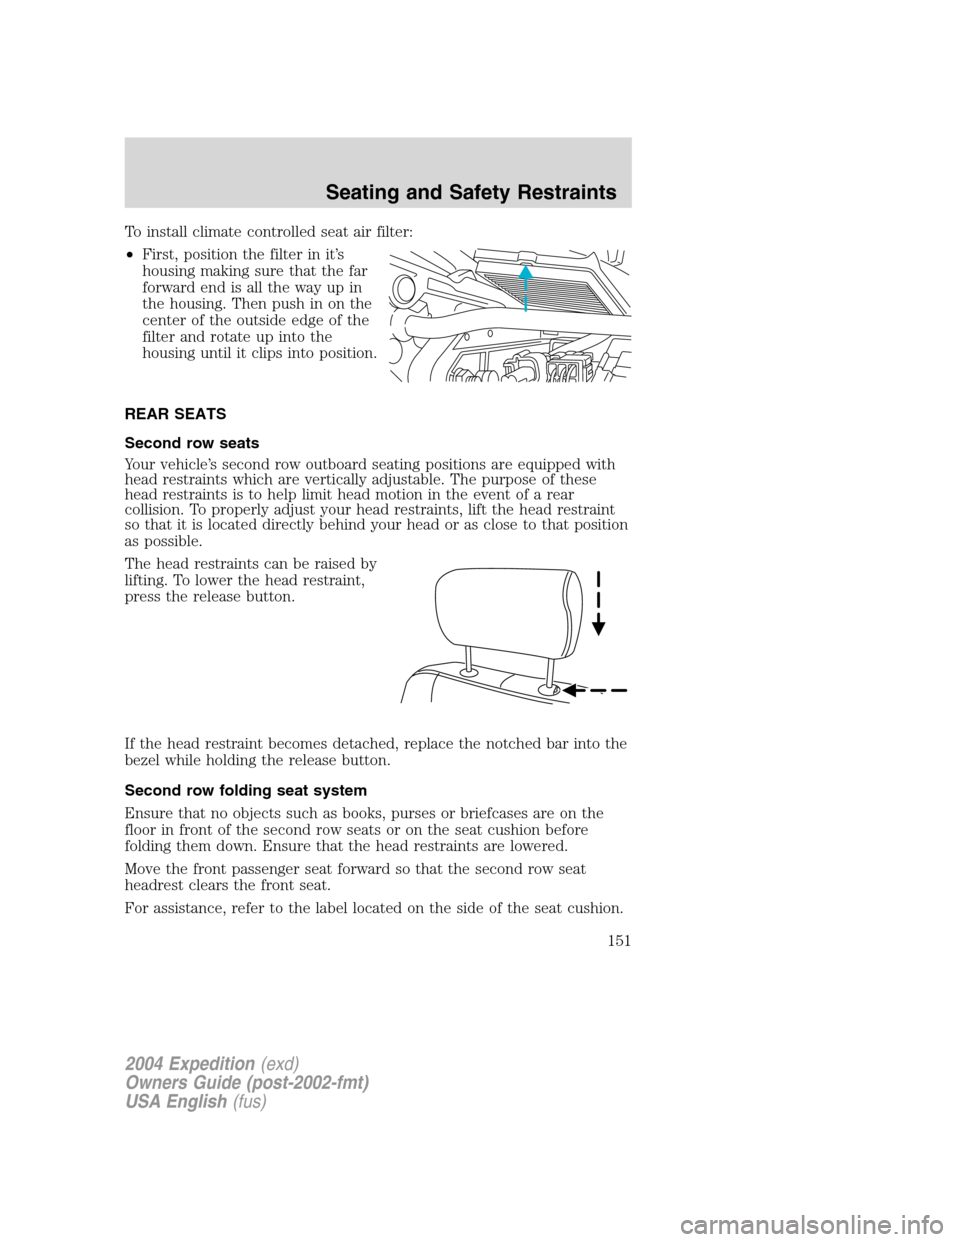 FORD EXPEDITION 2004 2.G Owners Manual To install climate controlled seat air filter:
•First, position the filter in it’s
housing making sure that the far
forward end is all the way up in
the housing. Then push in on the
center of the 